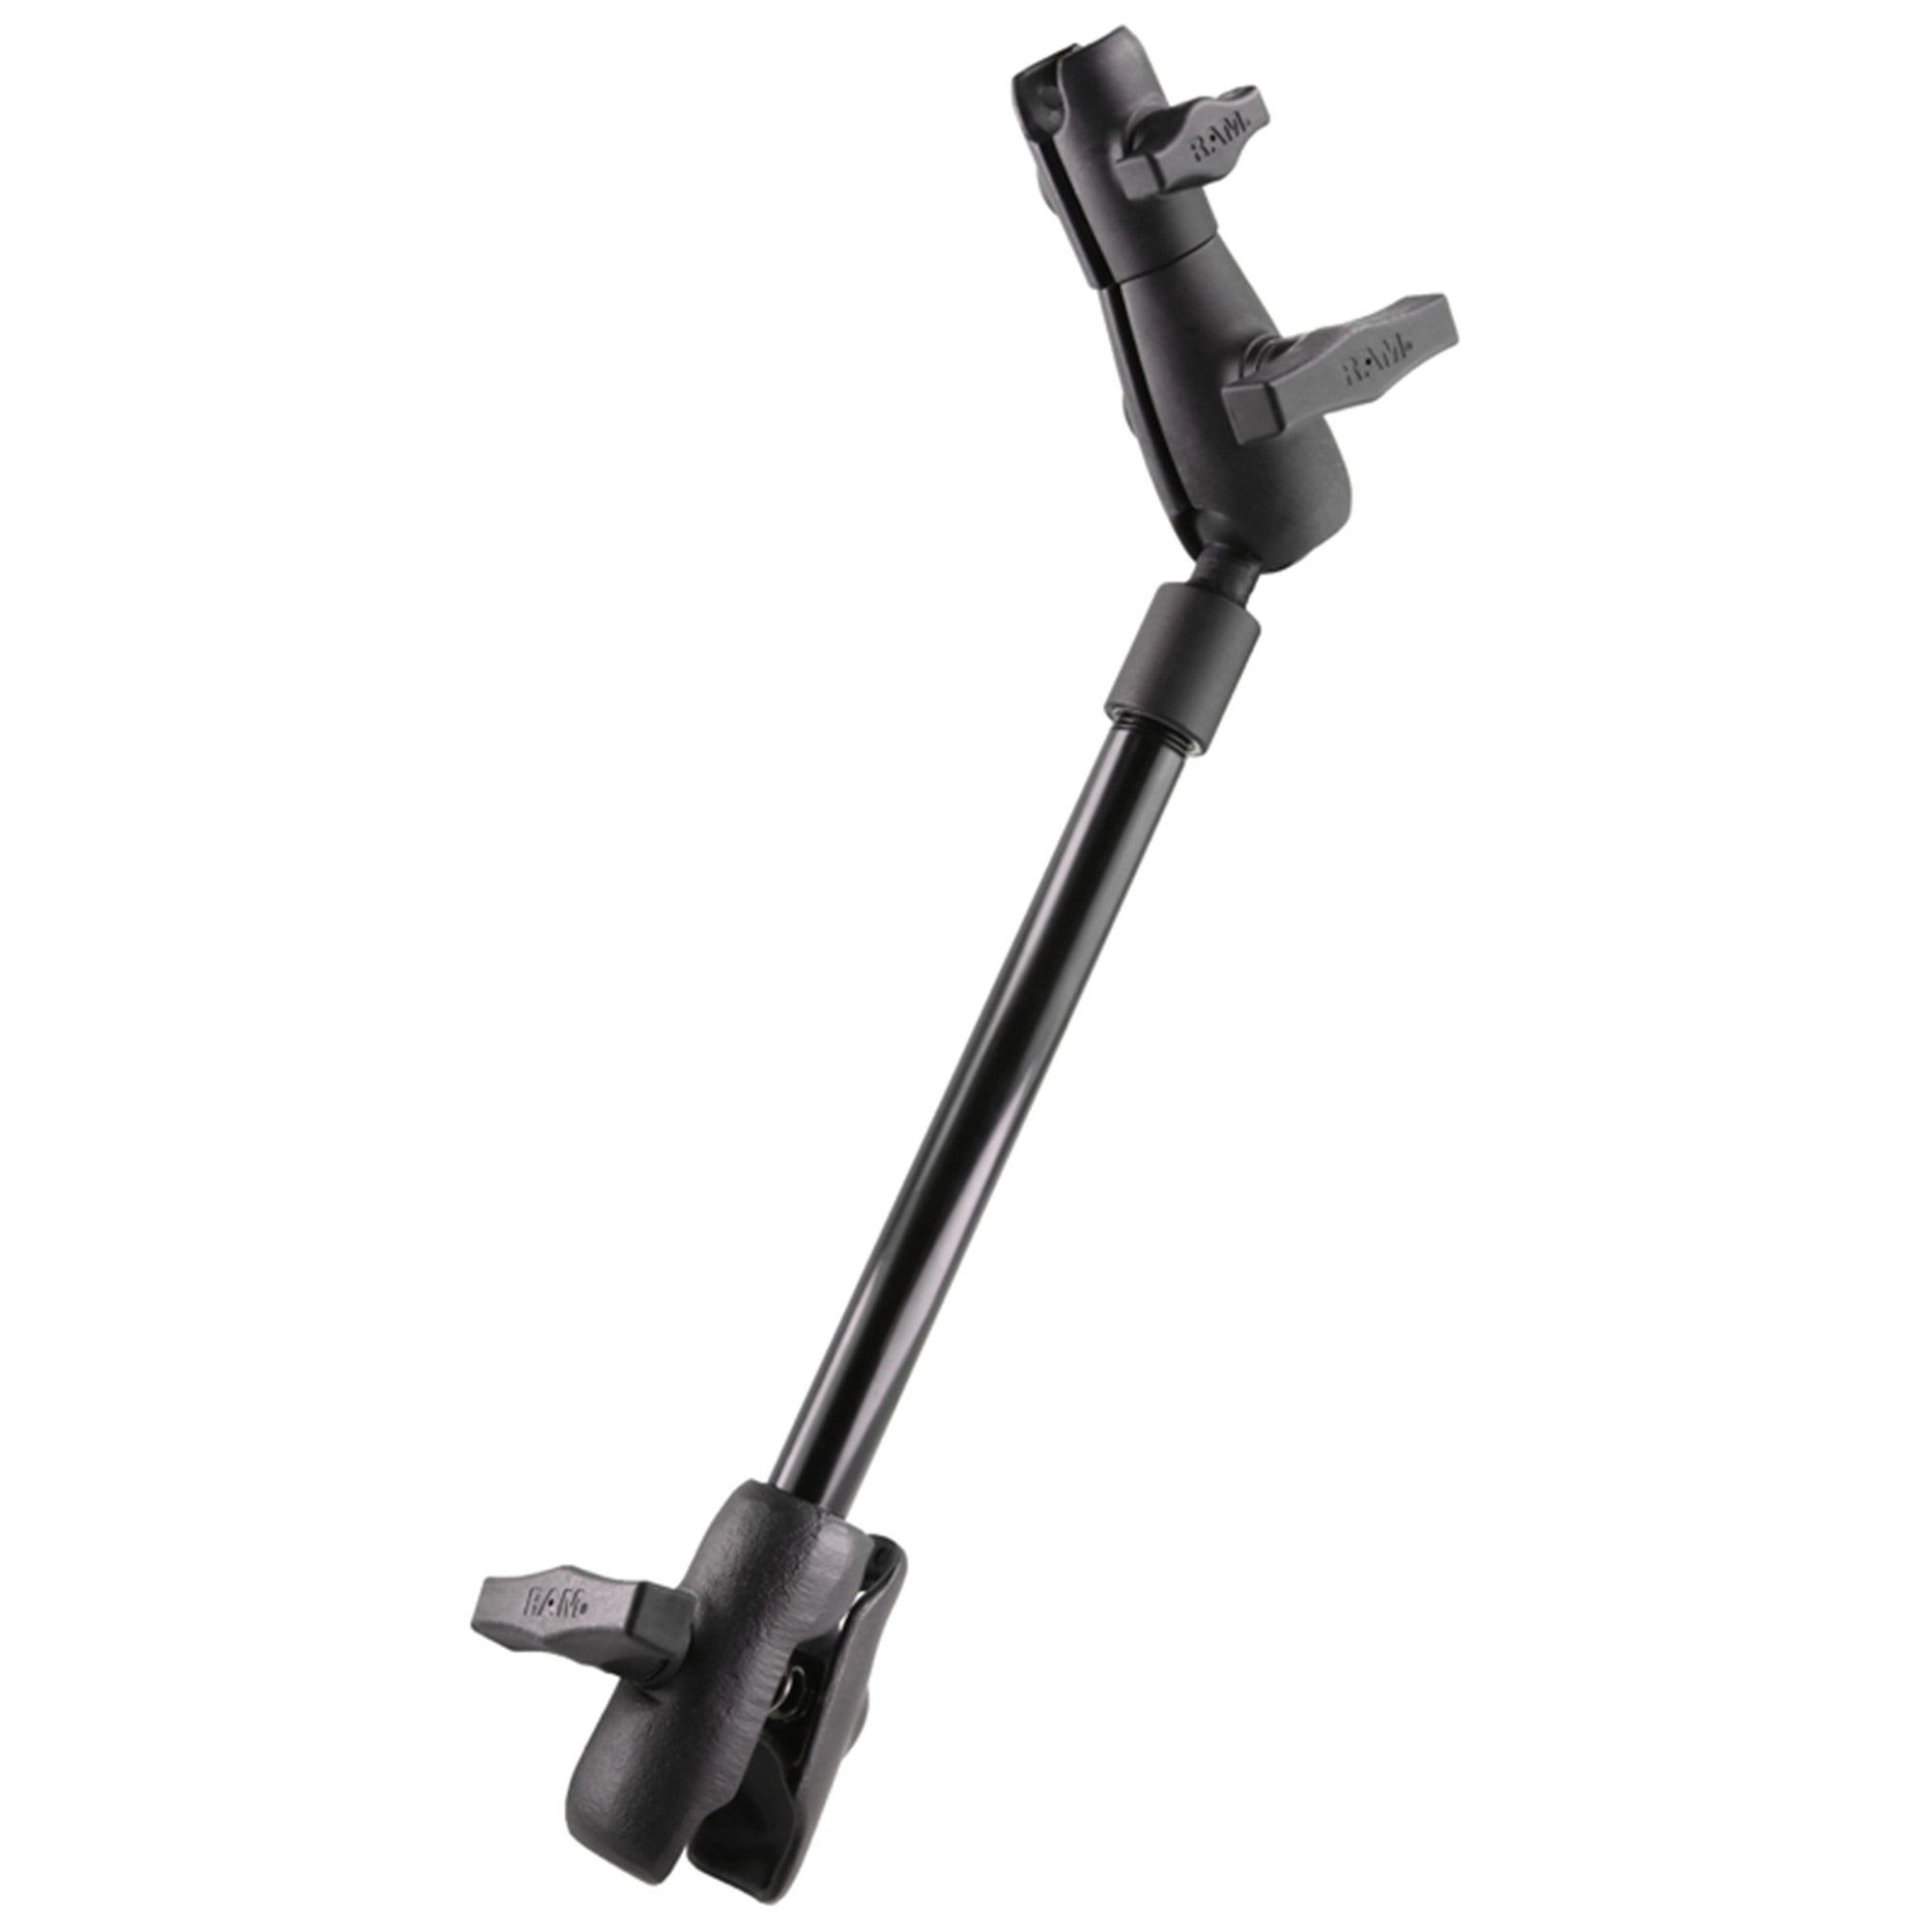 RAM Pipe & Socket 19" Extension Arm for Wheelchairs - B to C Size